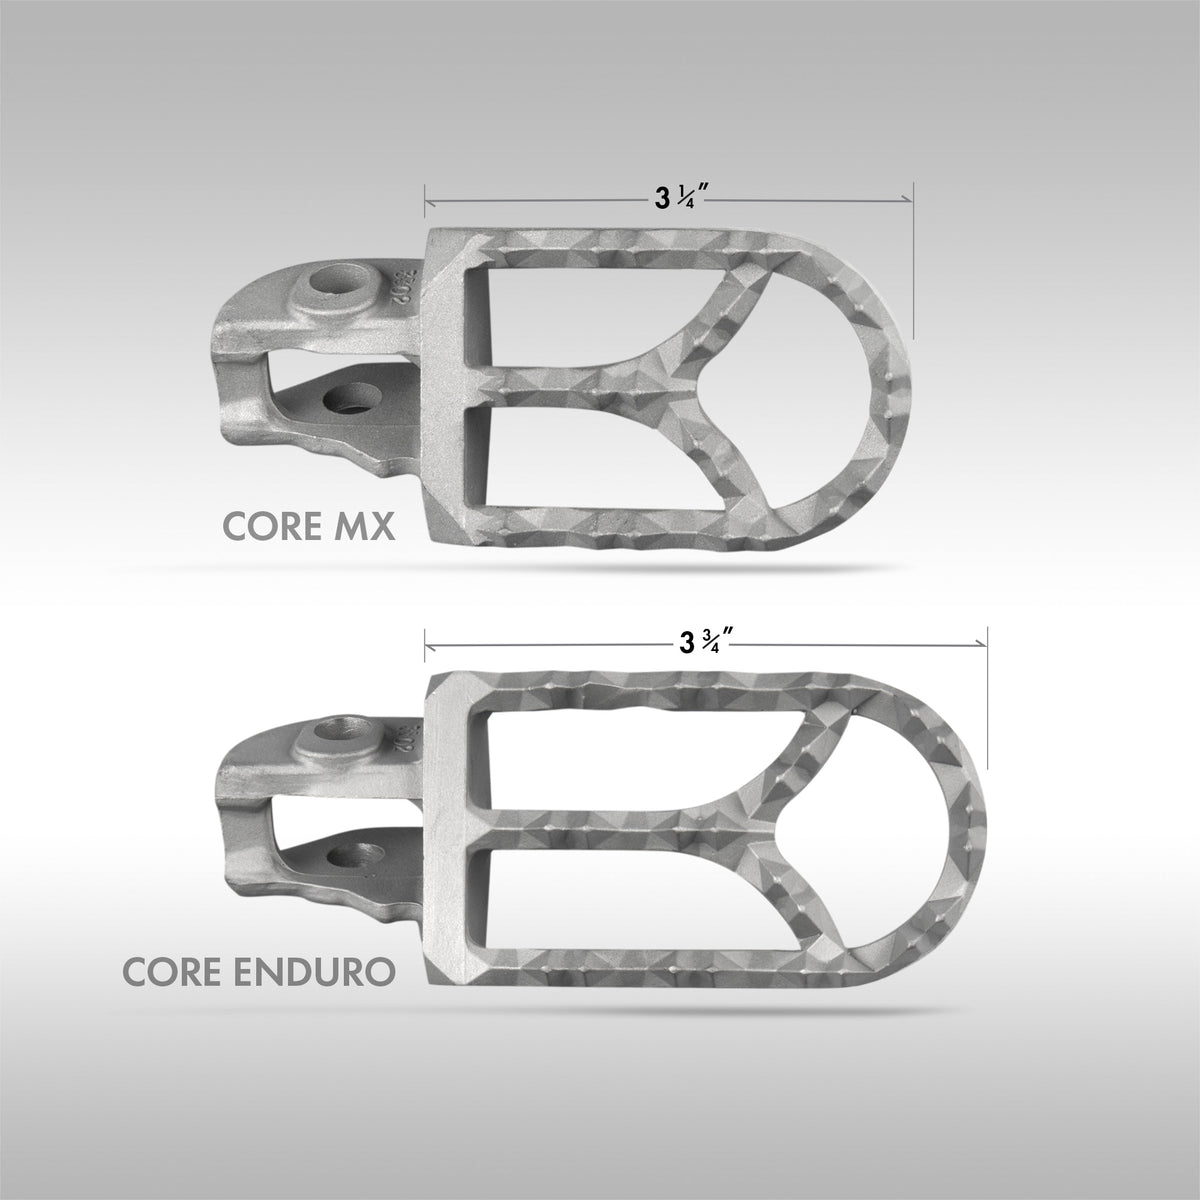 IMS PRODUCTS - CORE MX FOOT PEGS - KTM